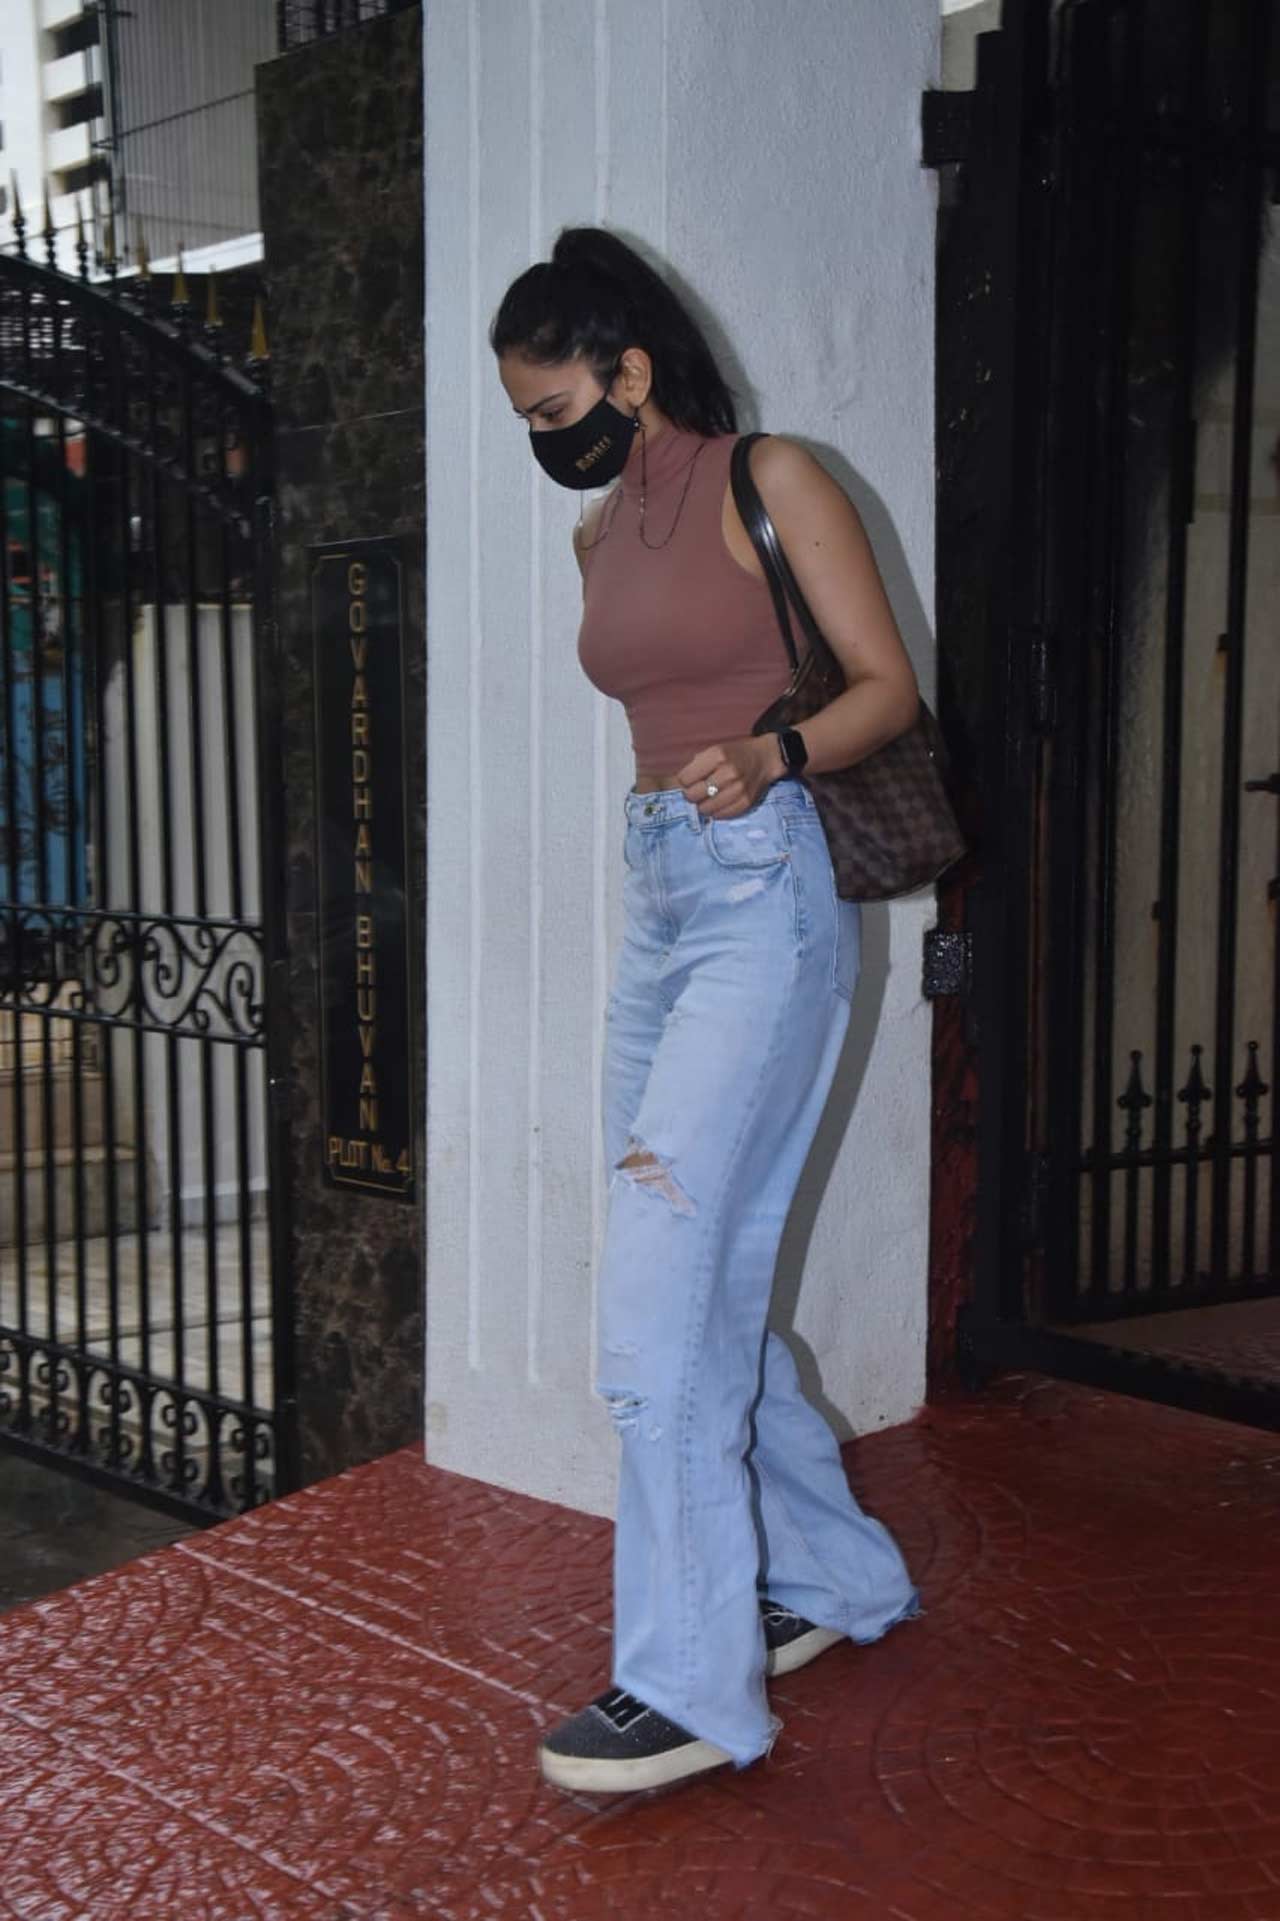 Rakul Preet Singh, who was snapped at Luv Ranjan's residence in Juhu, sported a beige coloured top, paired with basic denim during the outing. Rakul Preet Singh will next be seen in Ajay Devgn's directorial 'Mayday', alongside Ajay and Amitabh Bachchan. Rakul also has Anubhuti Kashyap's campus comedy-drama 'Doctor G'. 